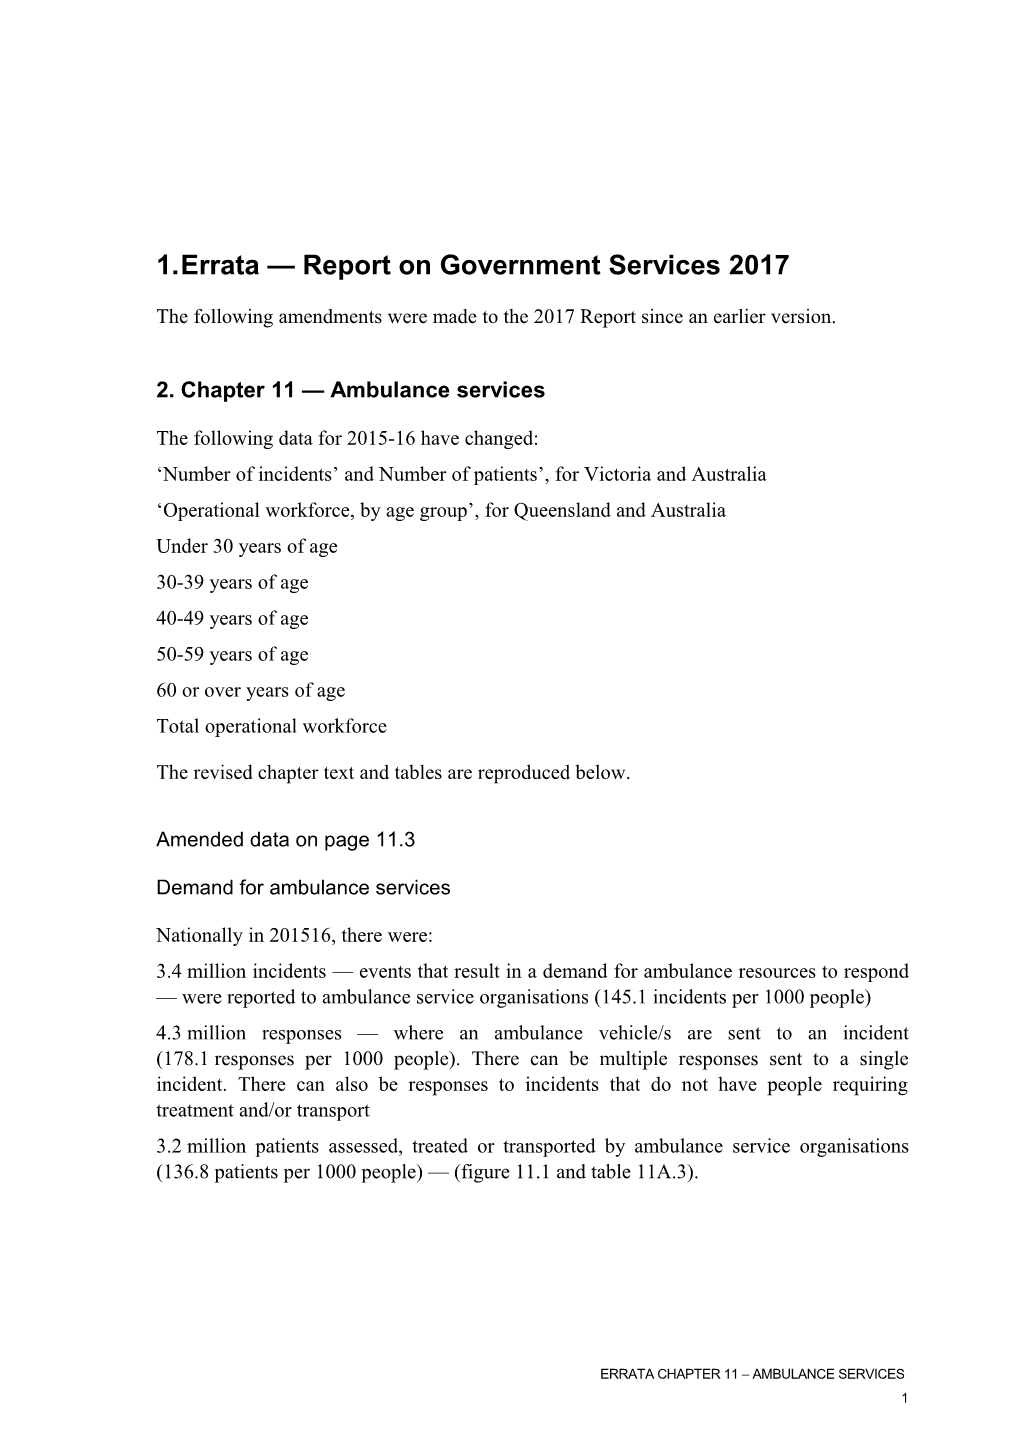 Errata Chapter 9 - Emergency Management Volume D - Report on Government Services 2017